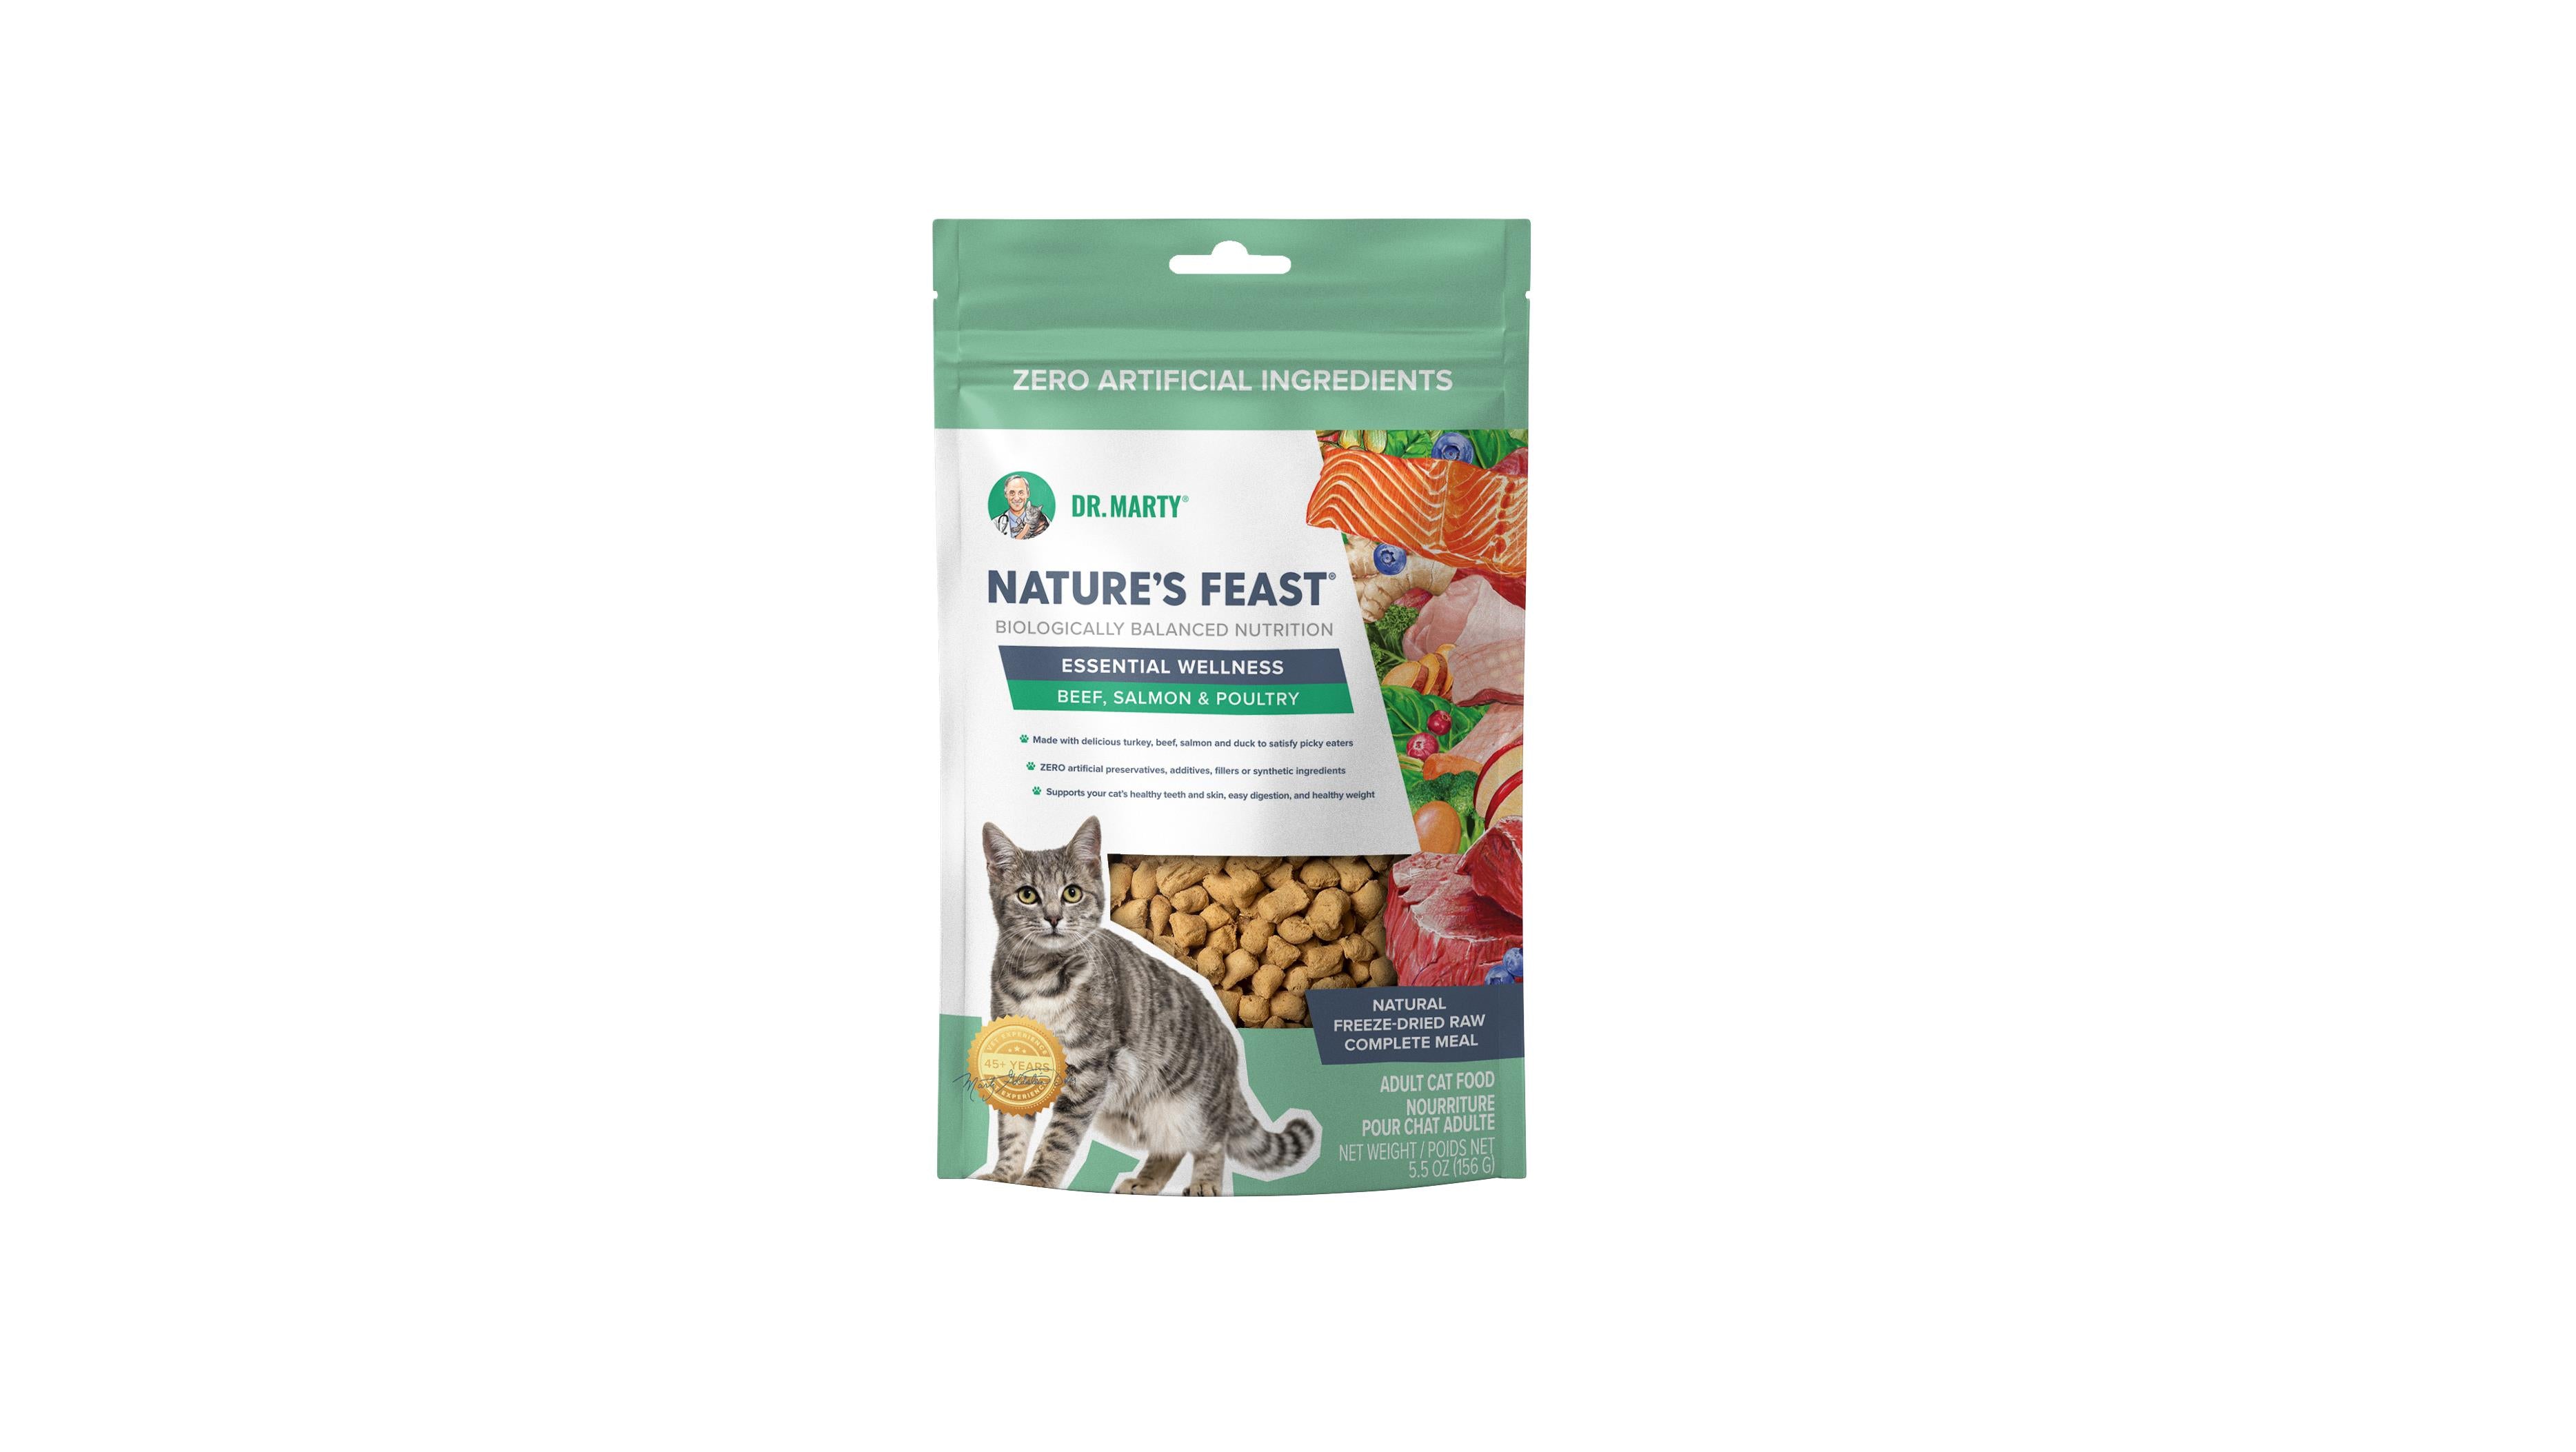 Dr. Marty Nature's Feast Essential Wellness Beef, Salmon and Poultry Freeze Dried Raw Cat Food  